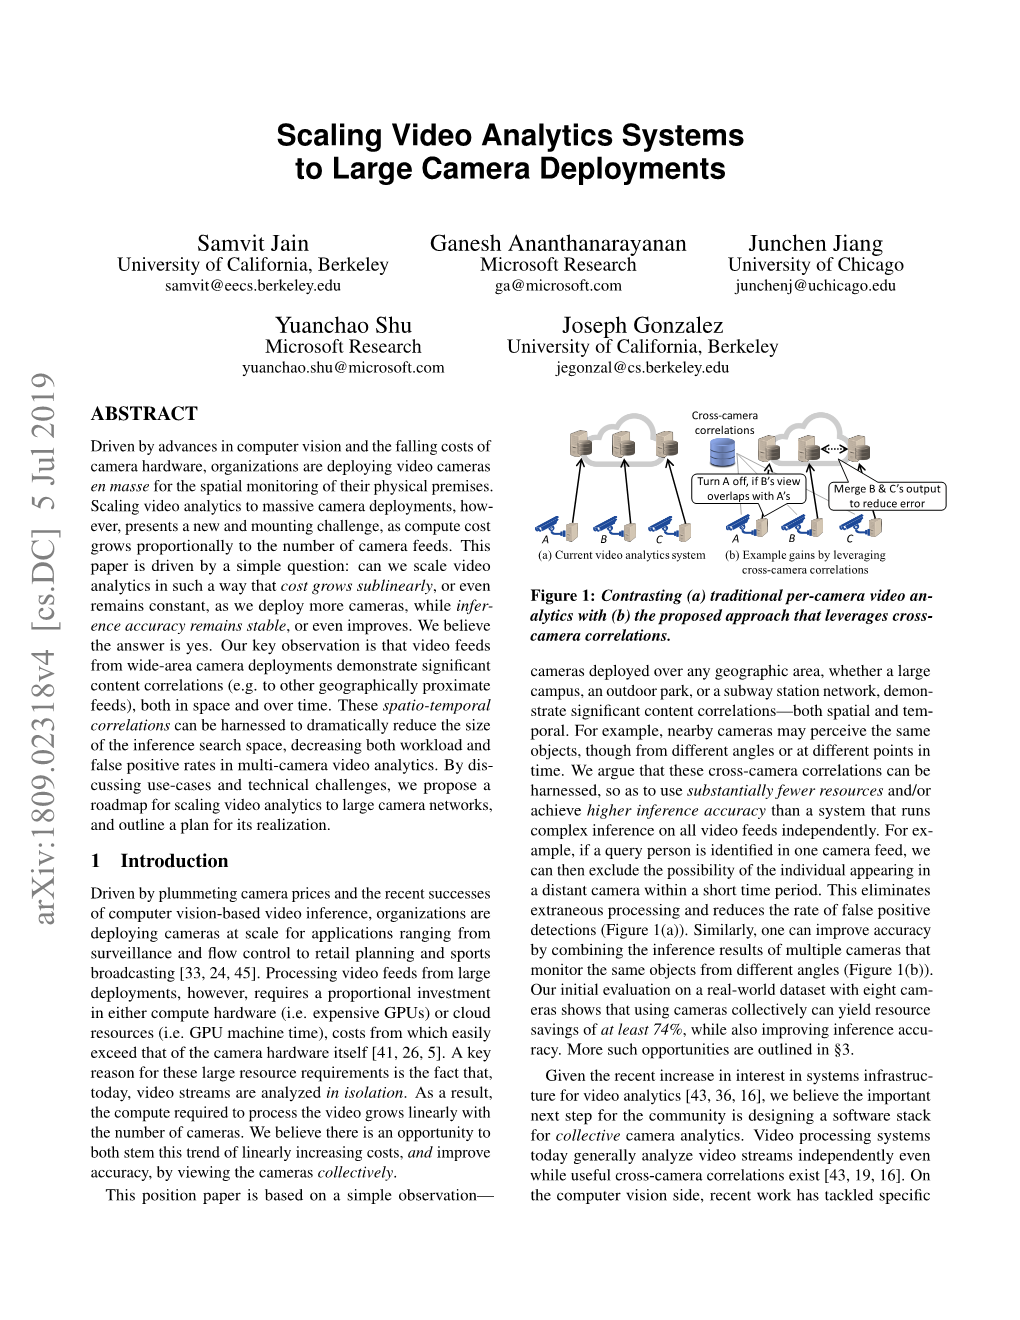 Scaling Video Analytics Systems to Large Camera Deployments